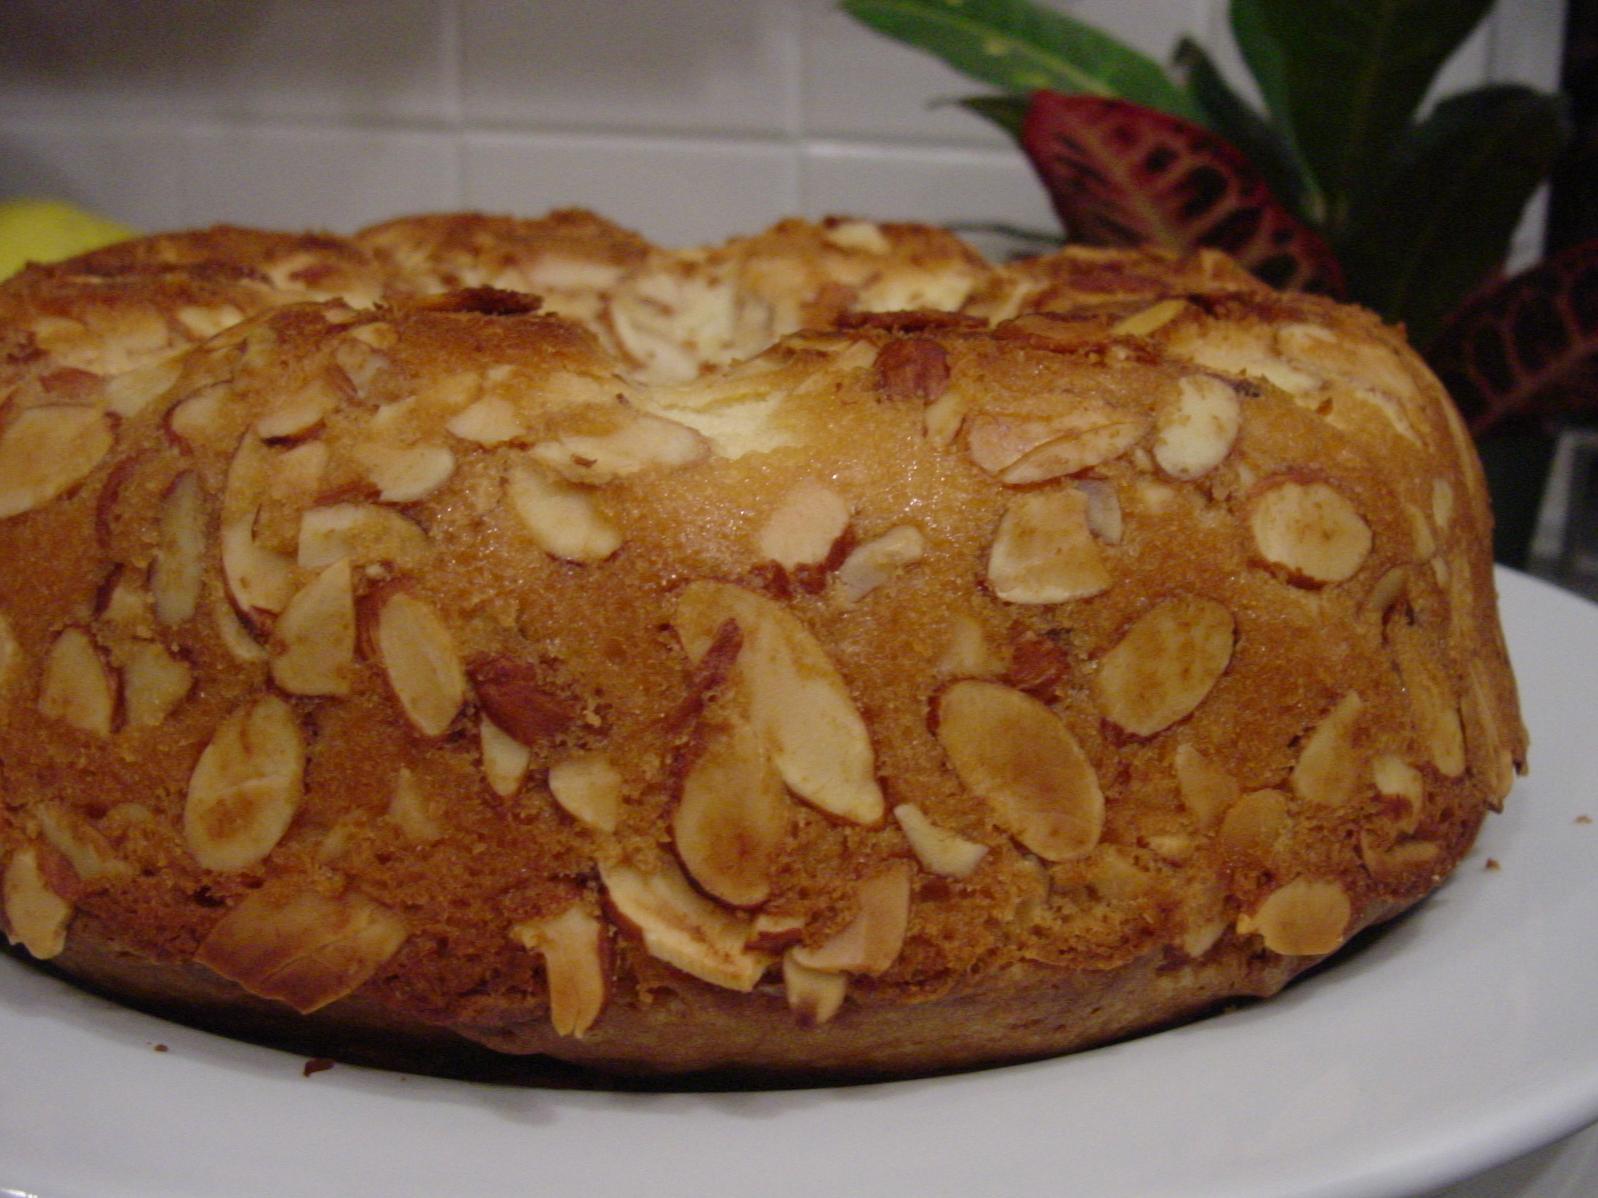  Aromatic & nutty: This cake is loaded with almond flavor and the aroma will fill your kitchen.